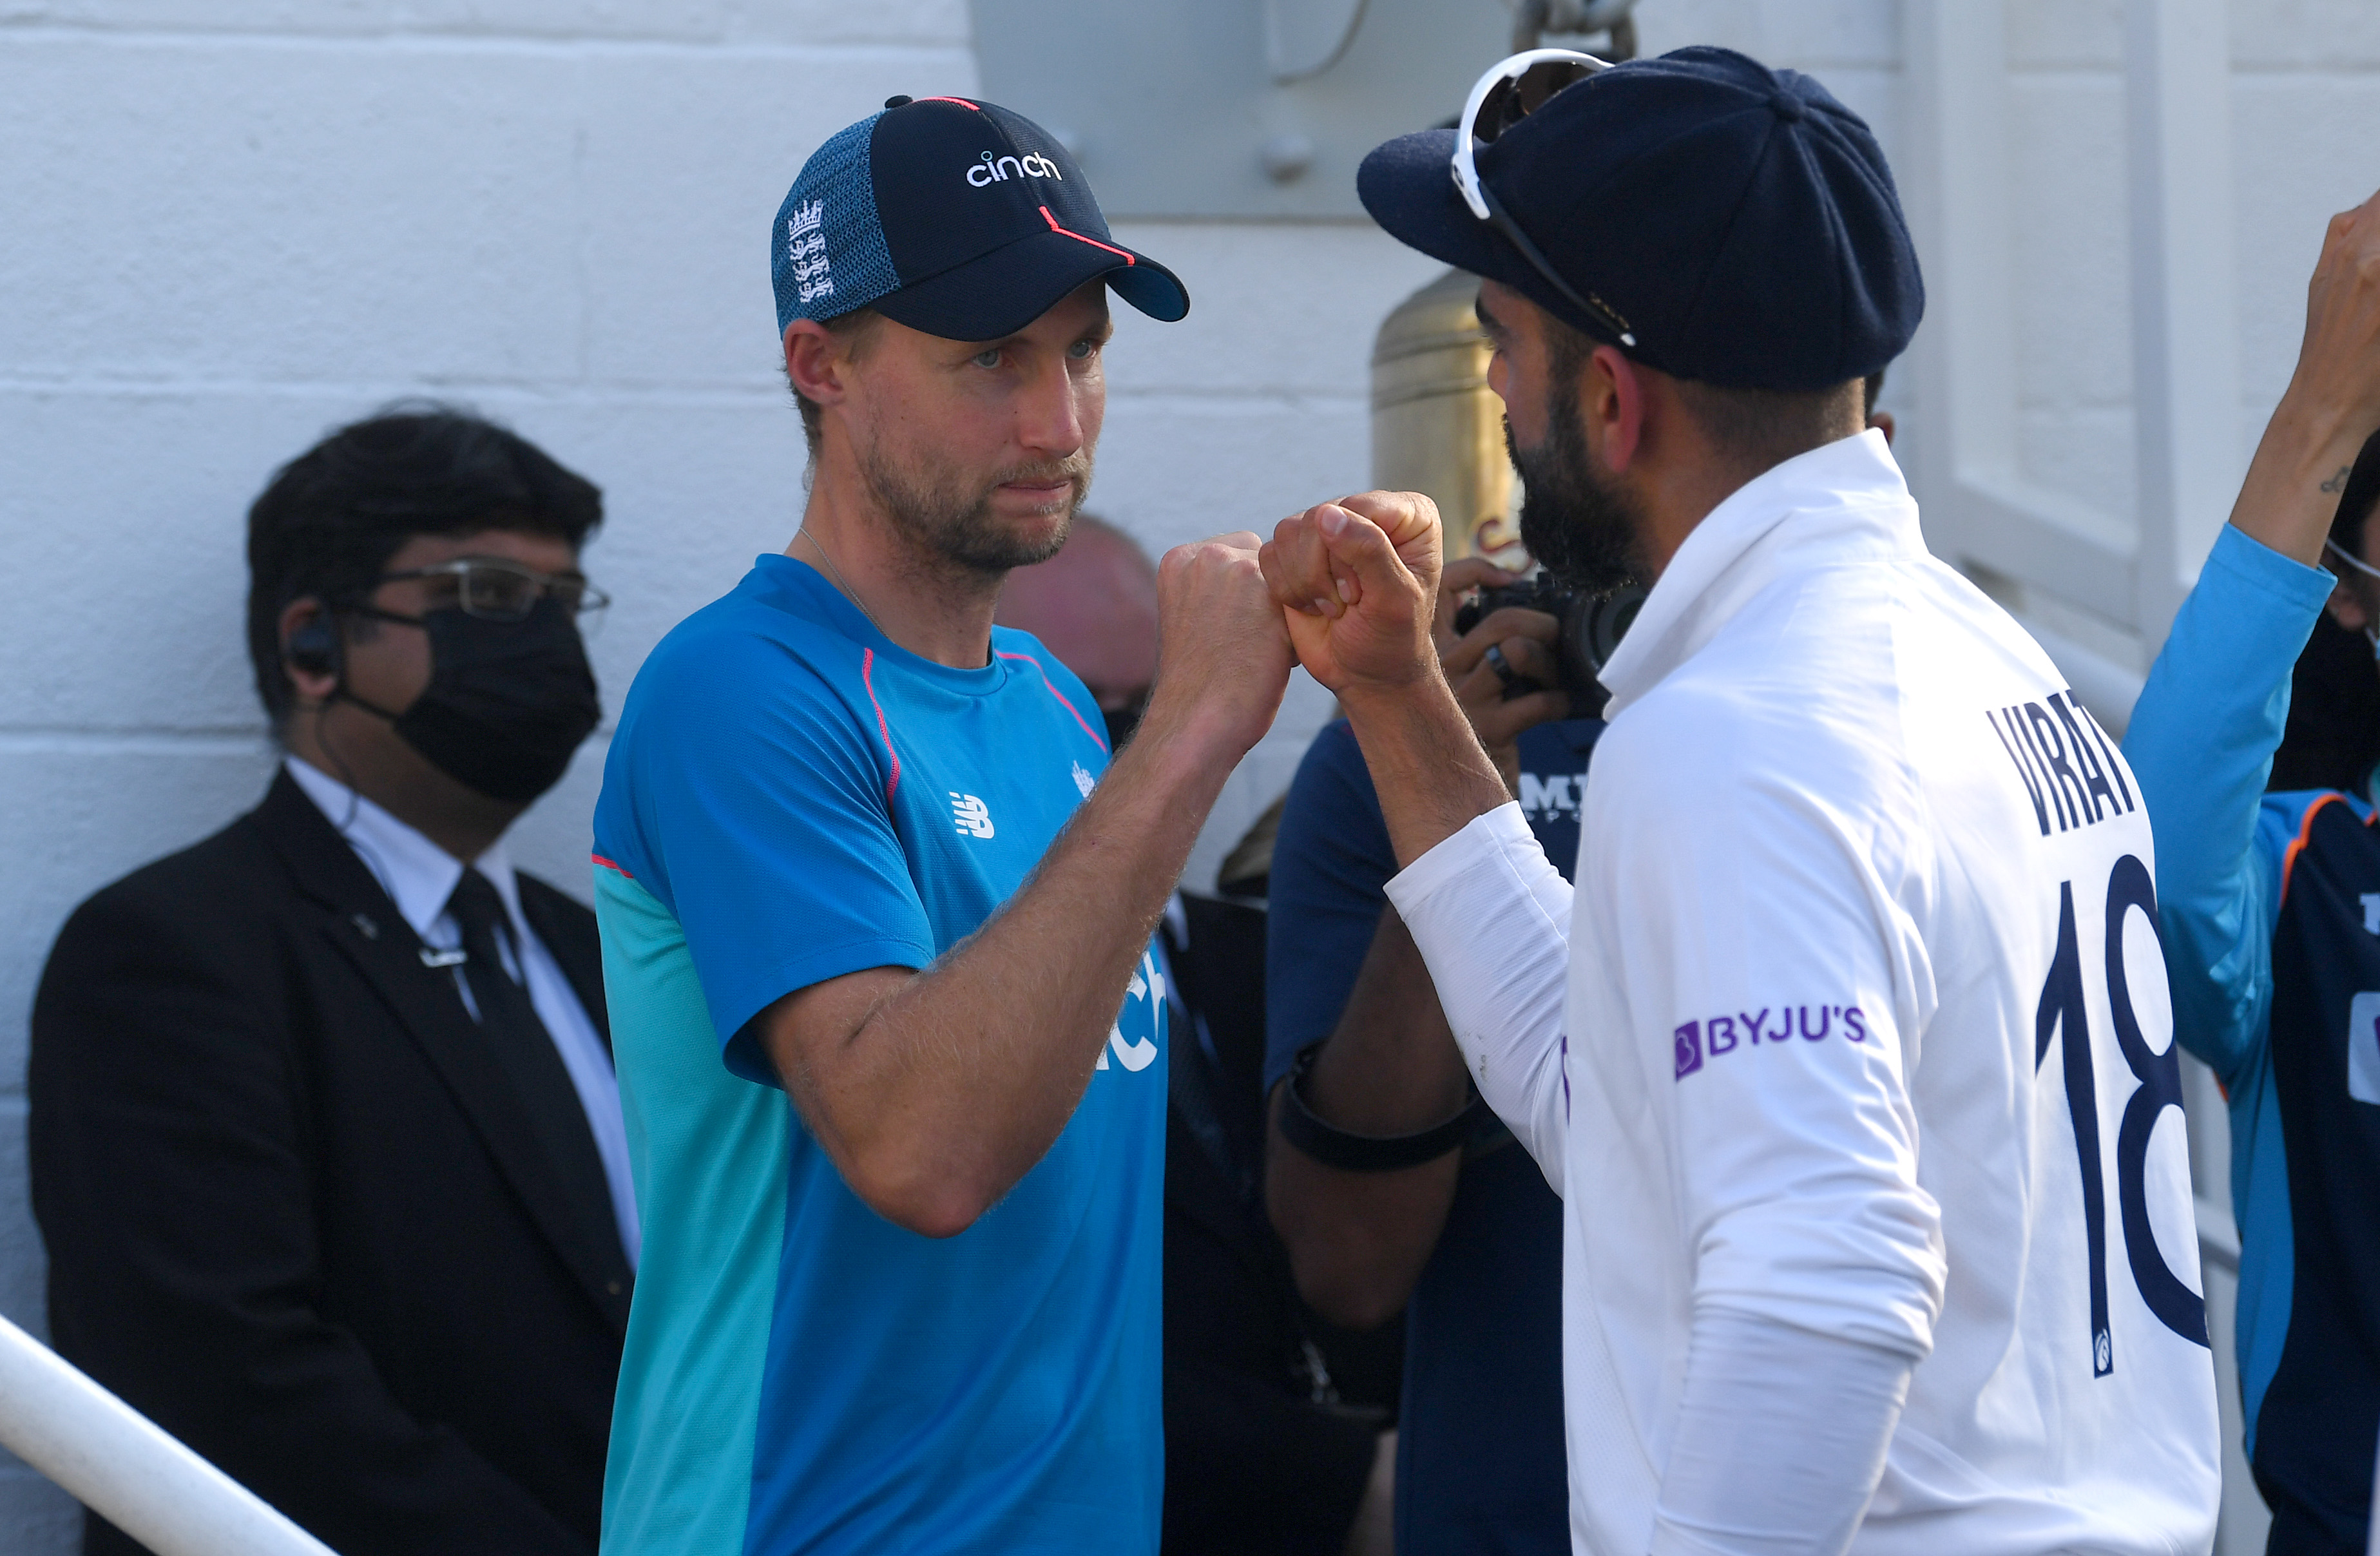 Joe Root explains loss against India at the Oval Test